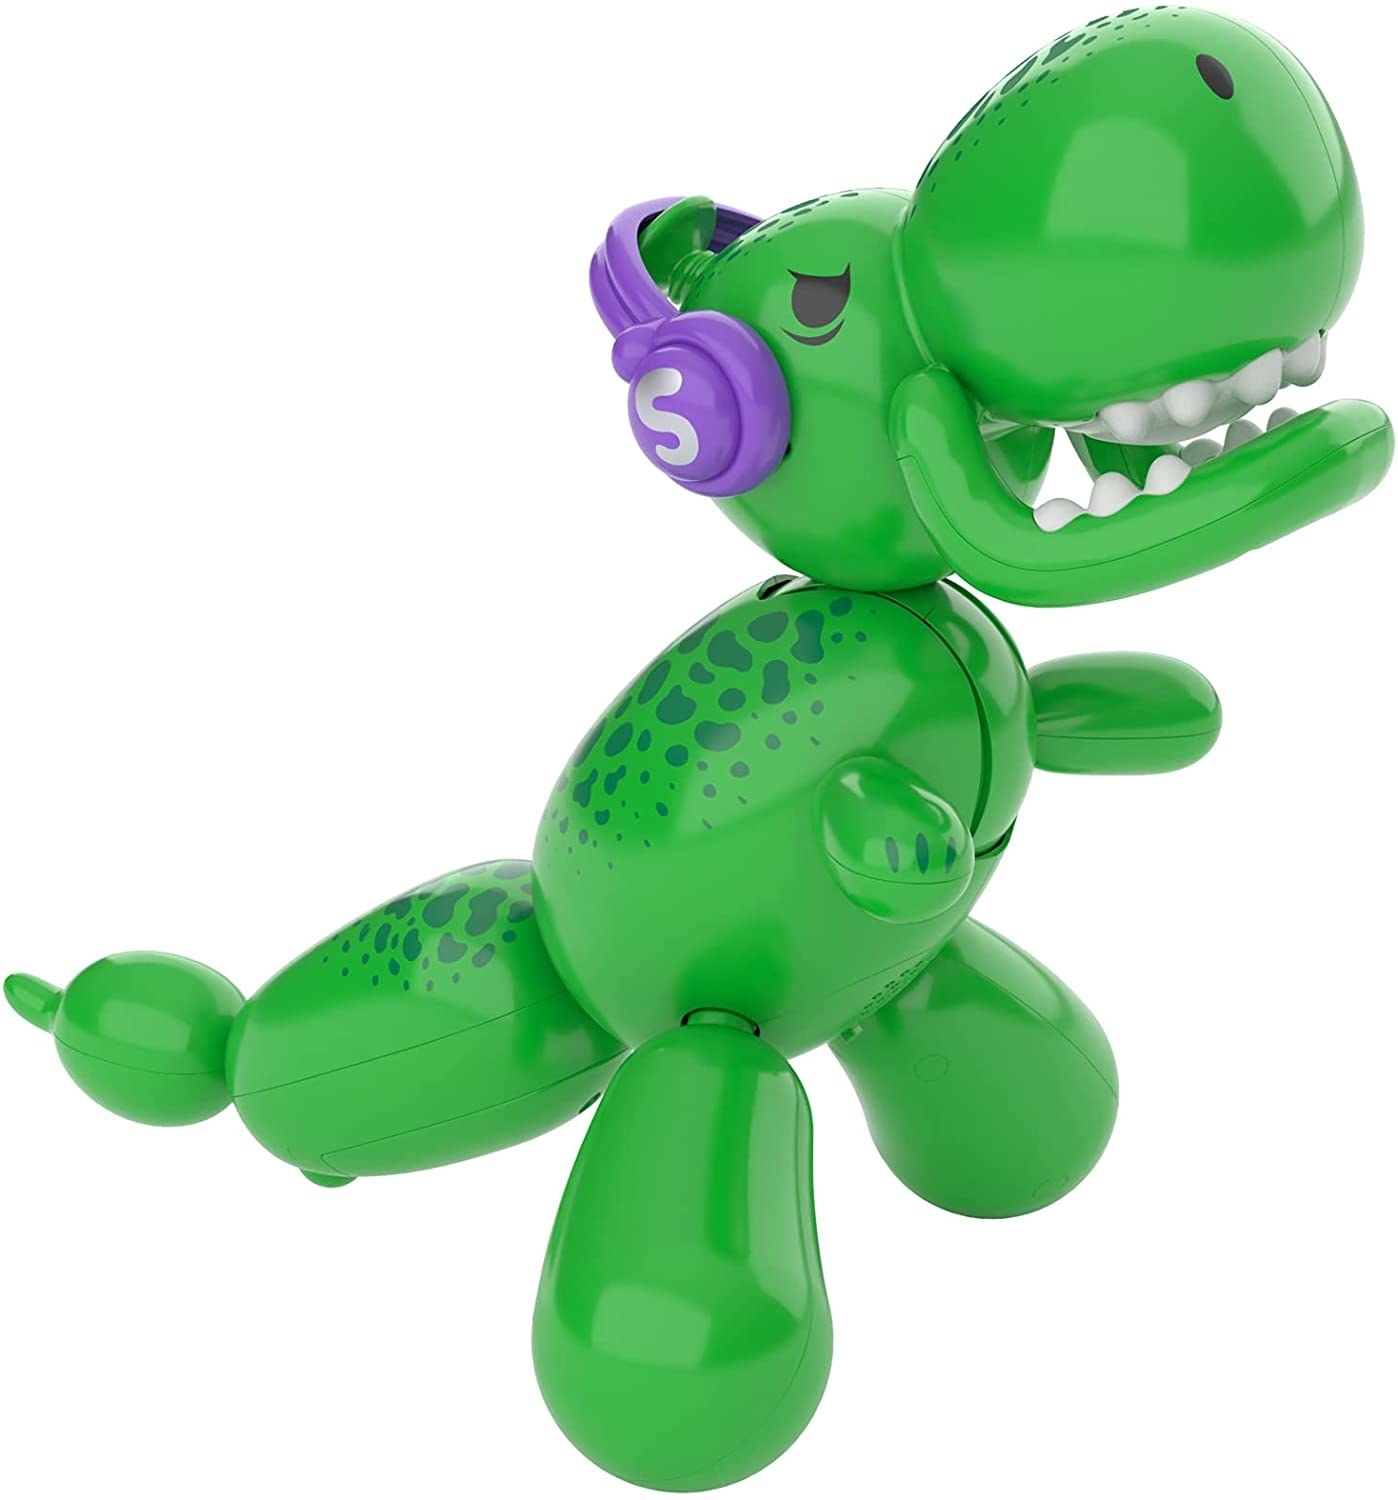 the balloon dino toy that is green